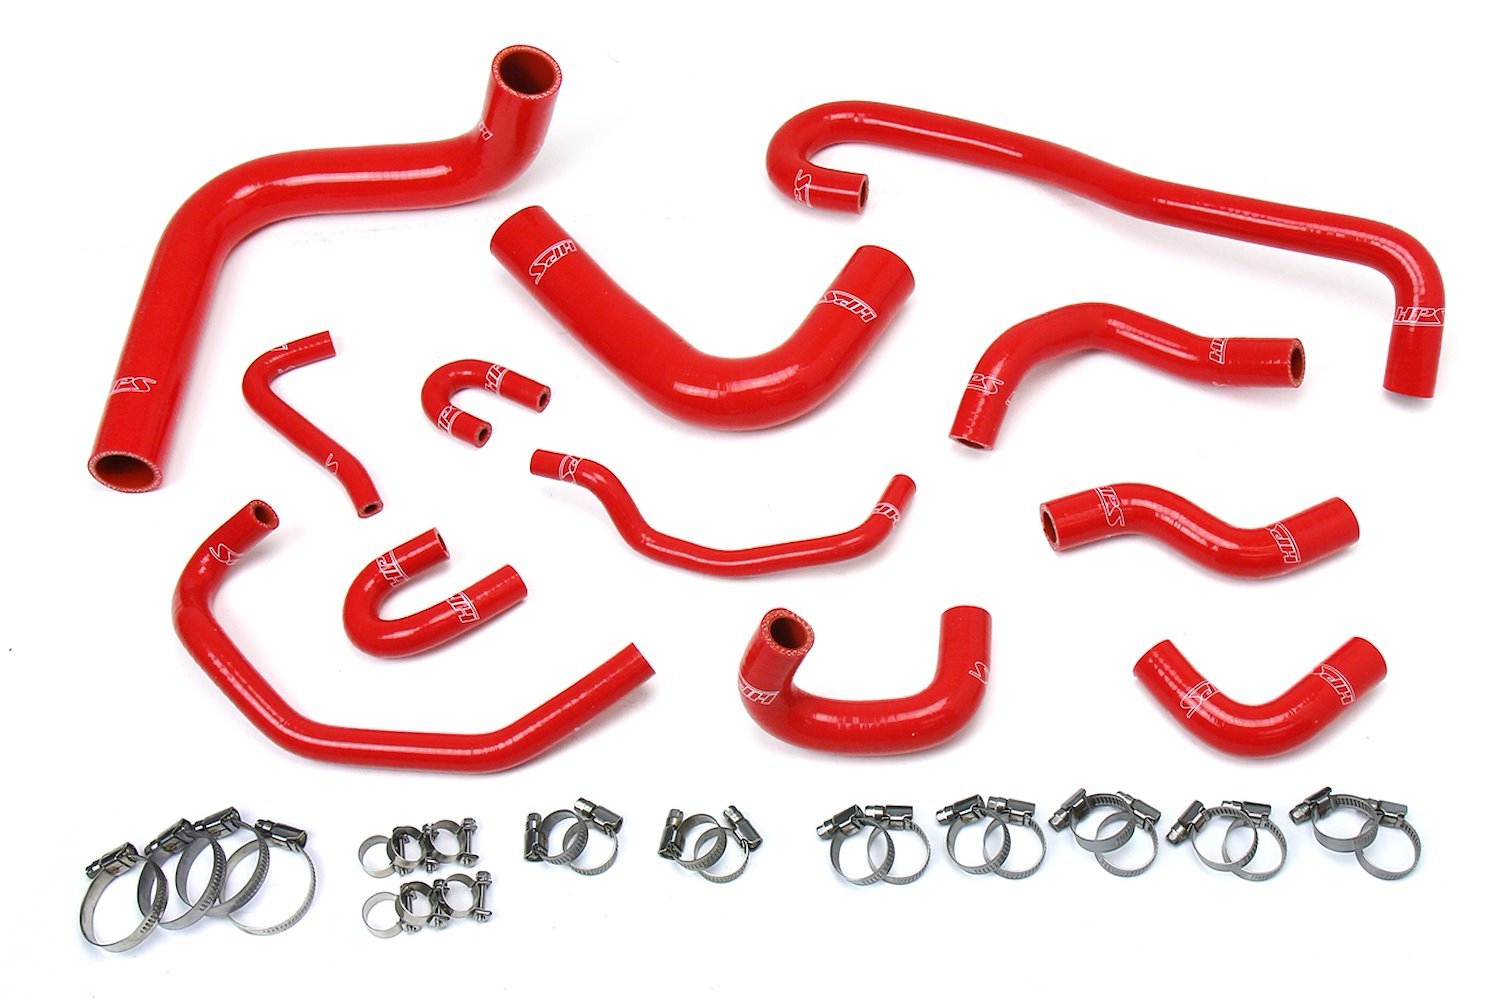 57-1656-RED Coolant Hose Kit, High-Temp 3-Ply Reinforced Silicone, Replace Rubber Radiator Heater Coolant Hoses